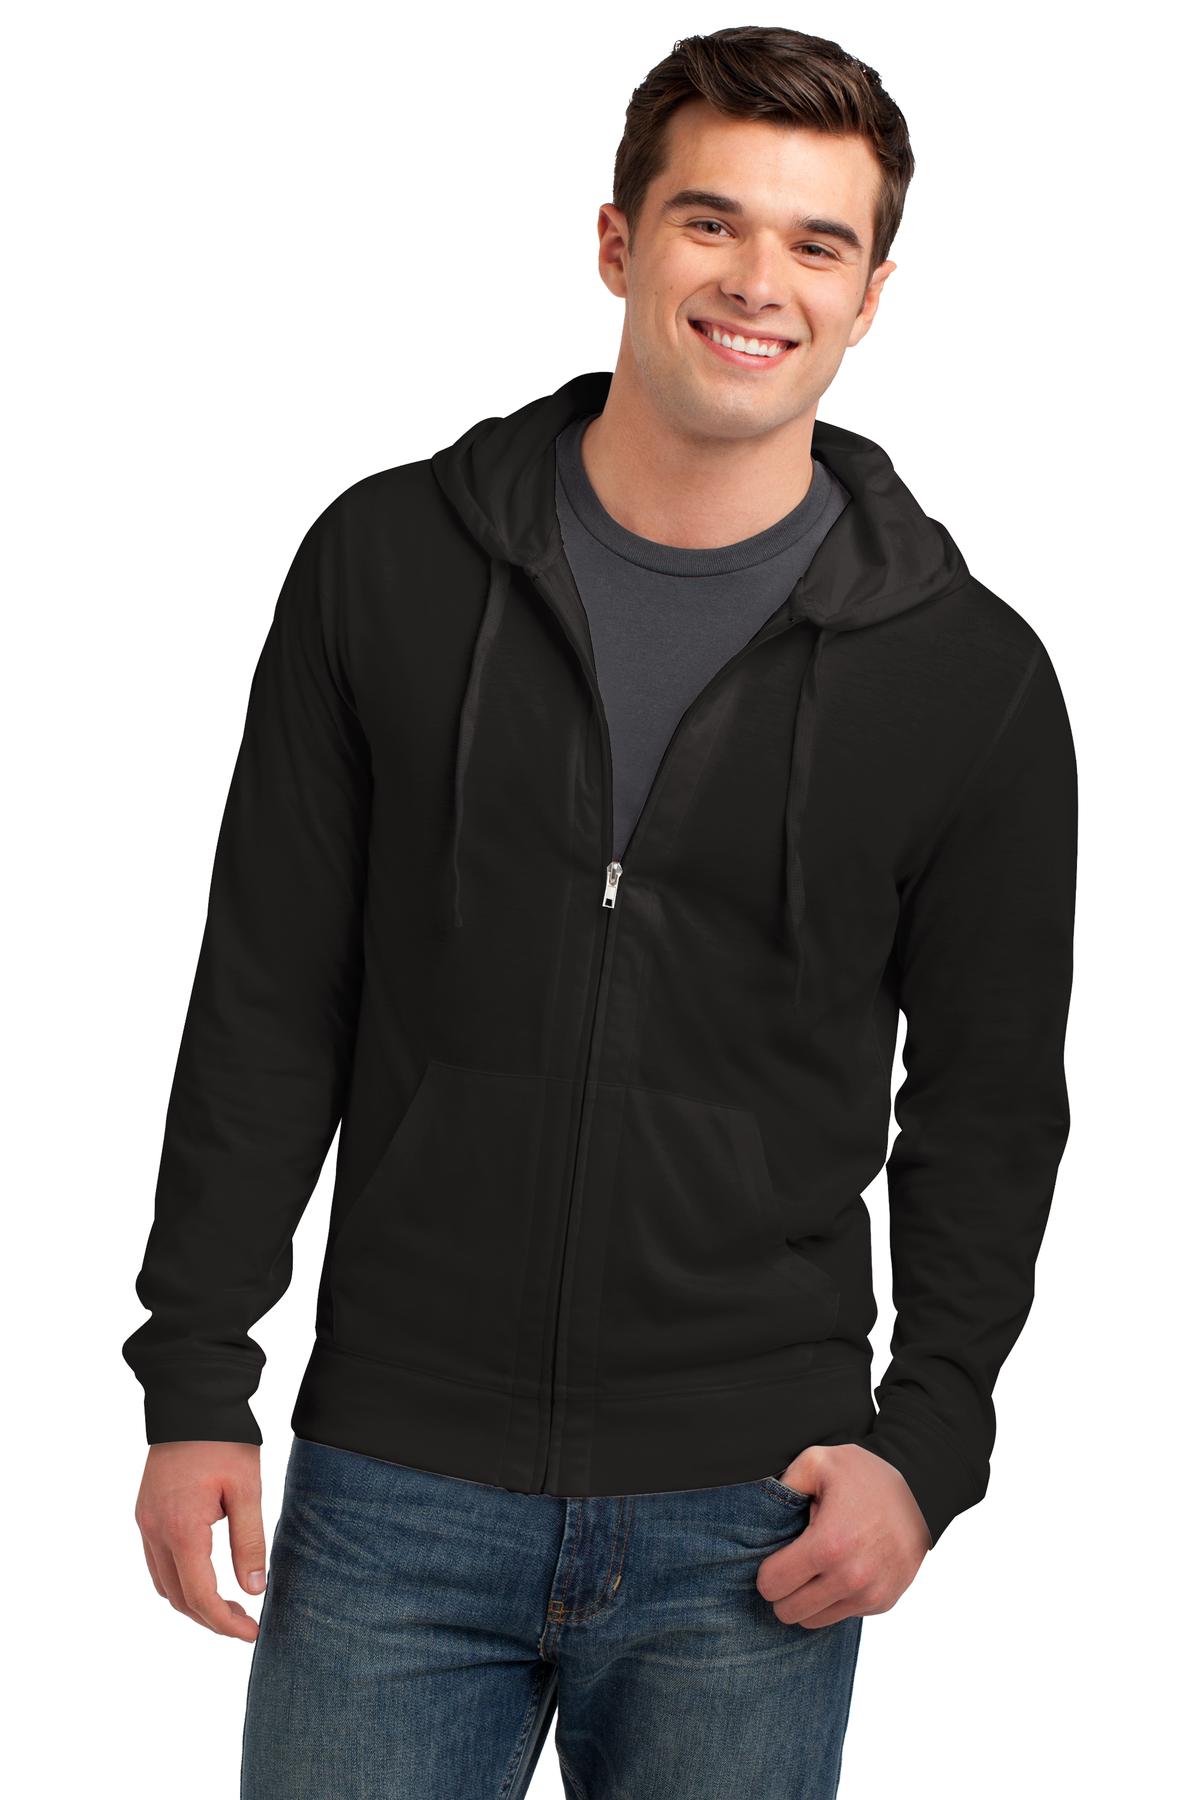 District Young Mens Jersey Full Zip Hoodie-L (Black) - image 1 of 6